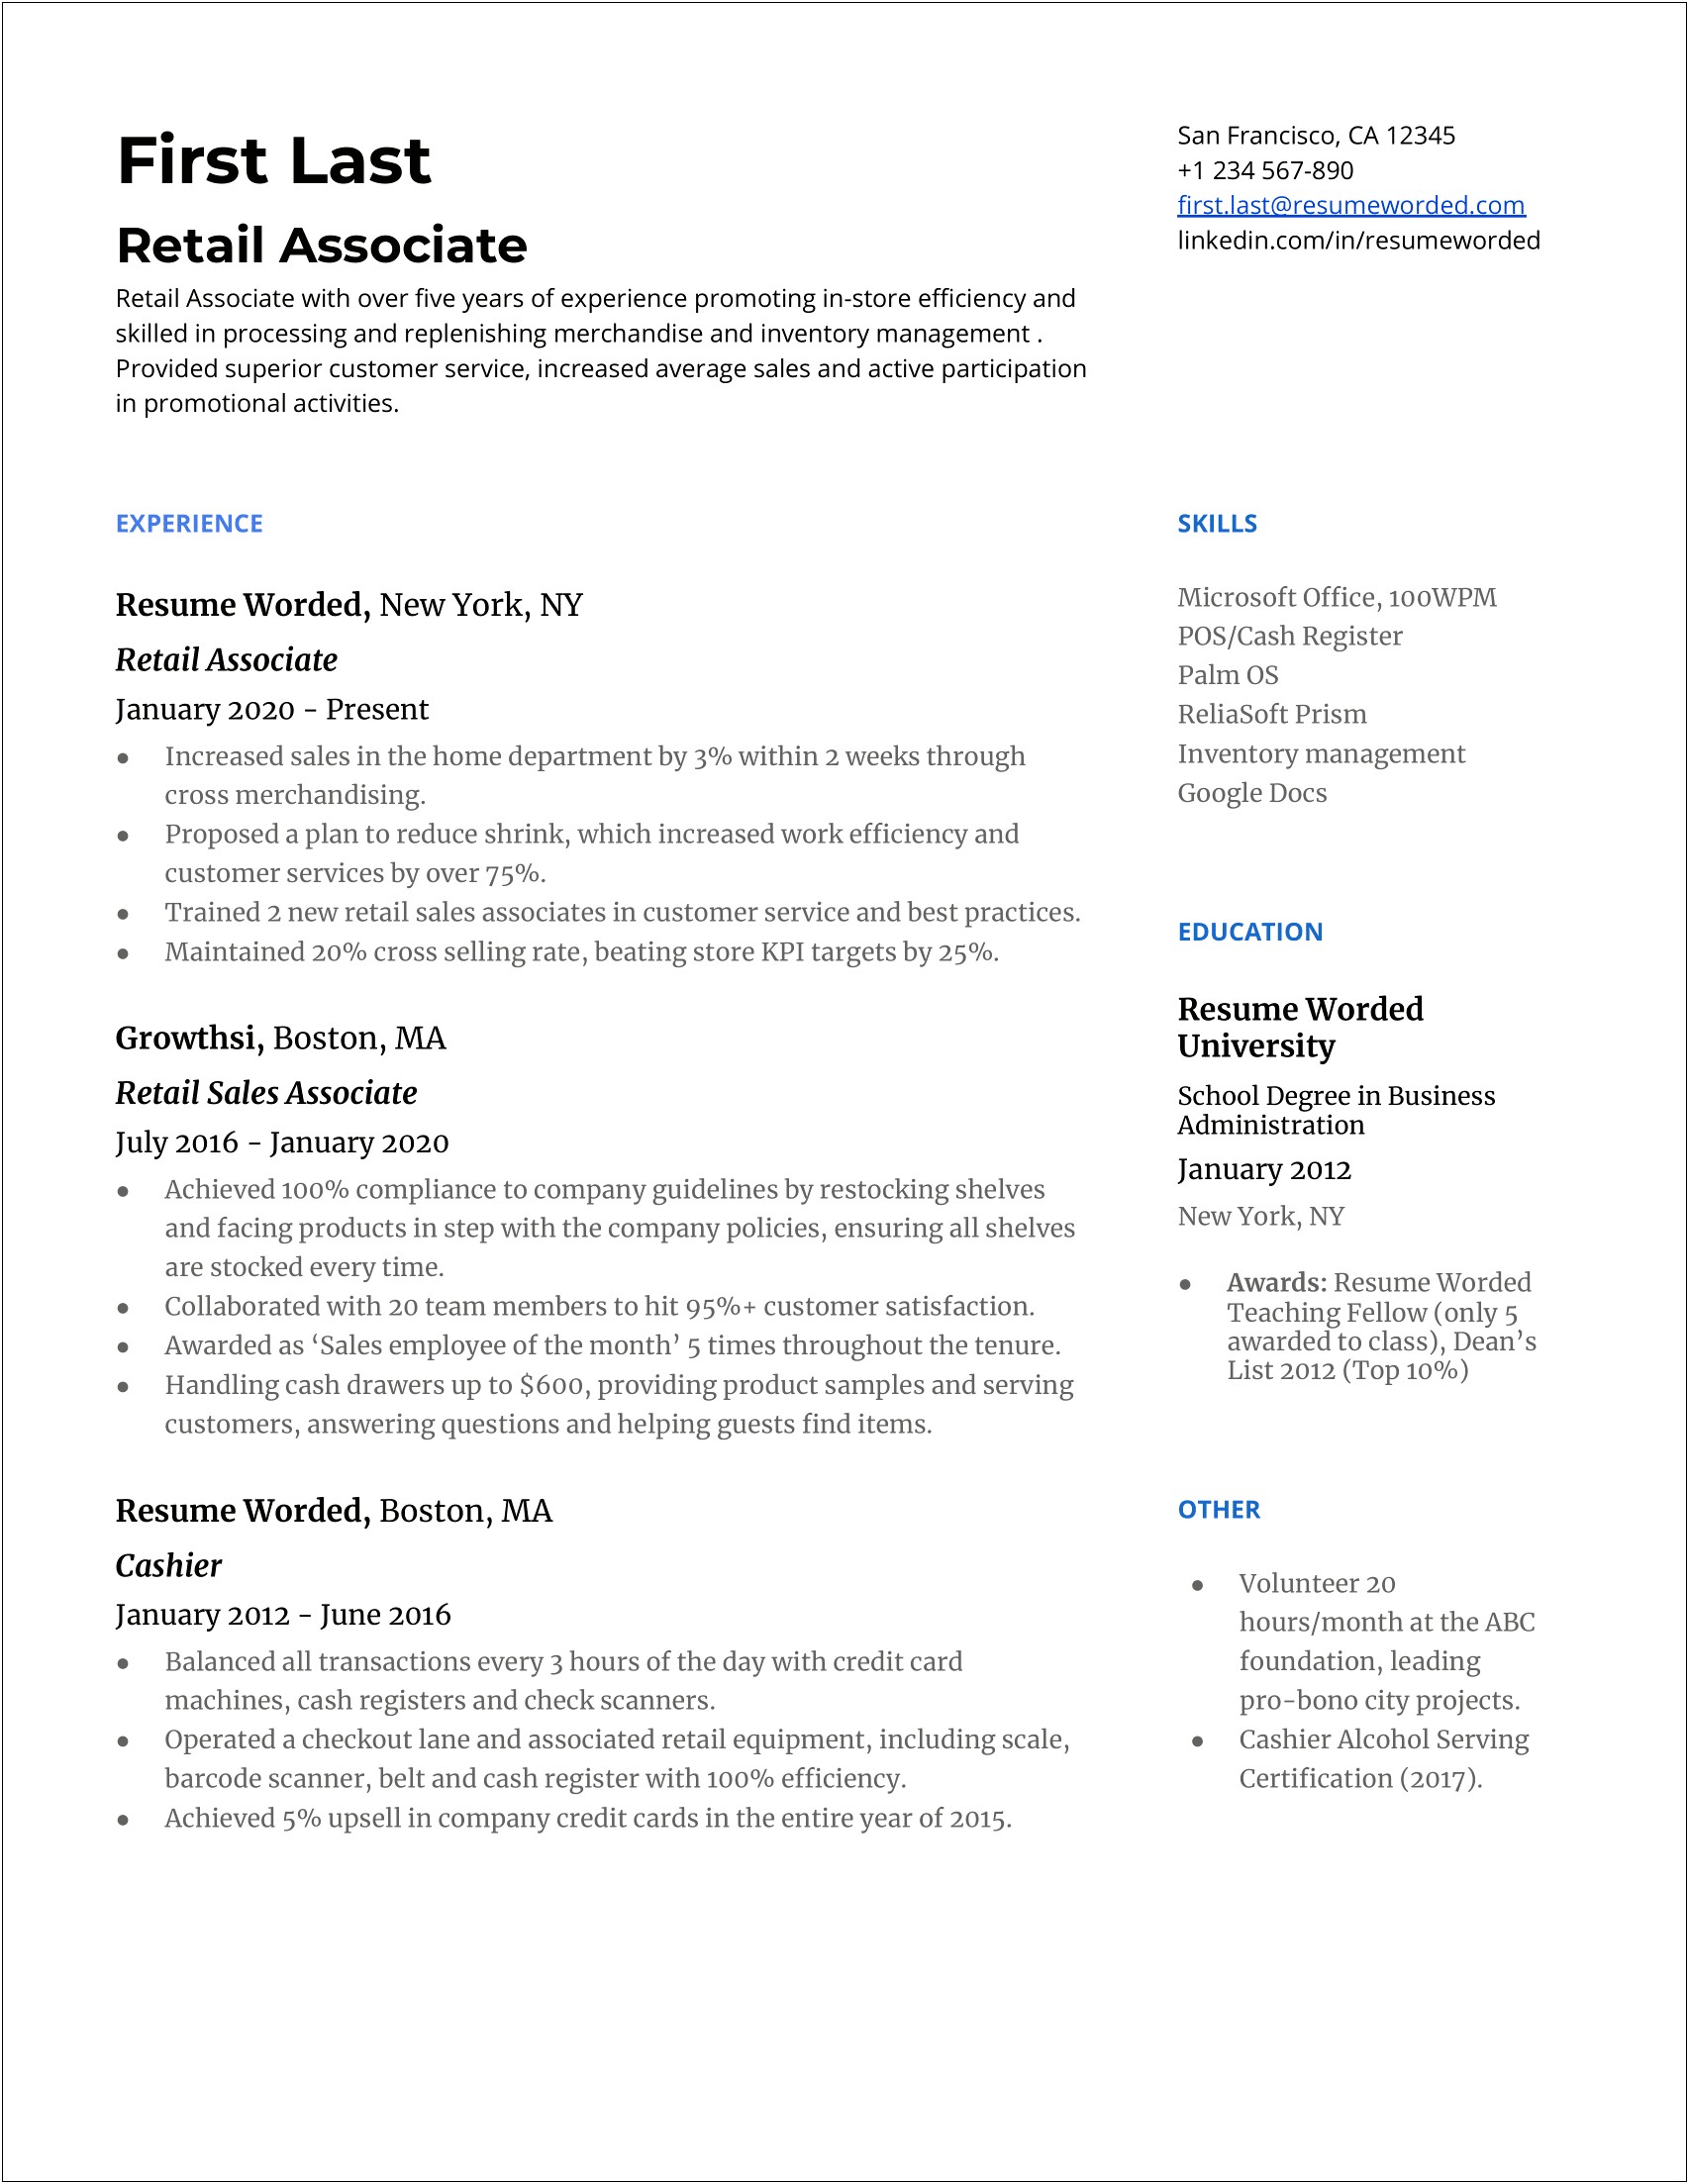 Best Resume Objective For Retail